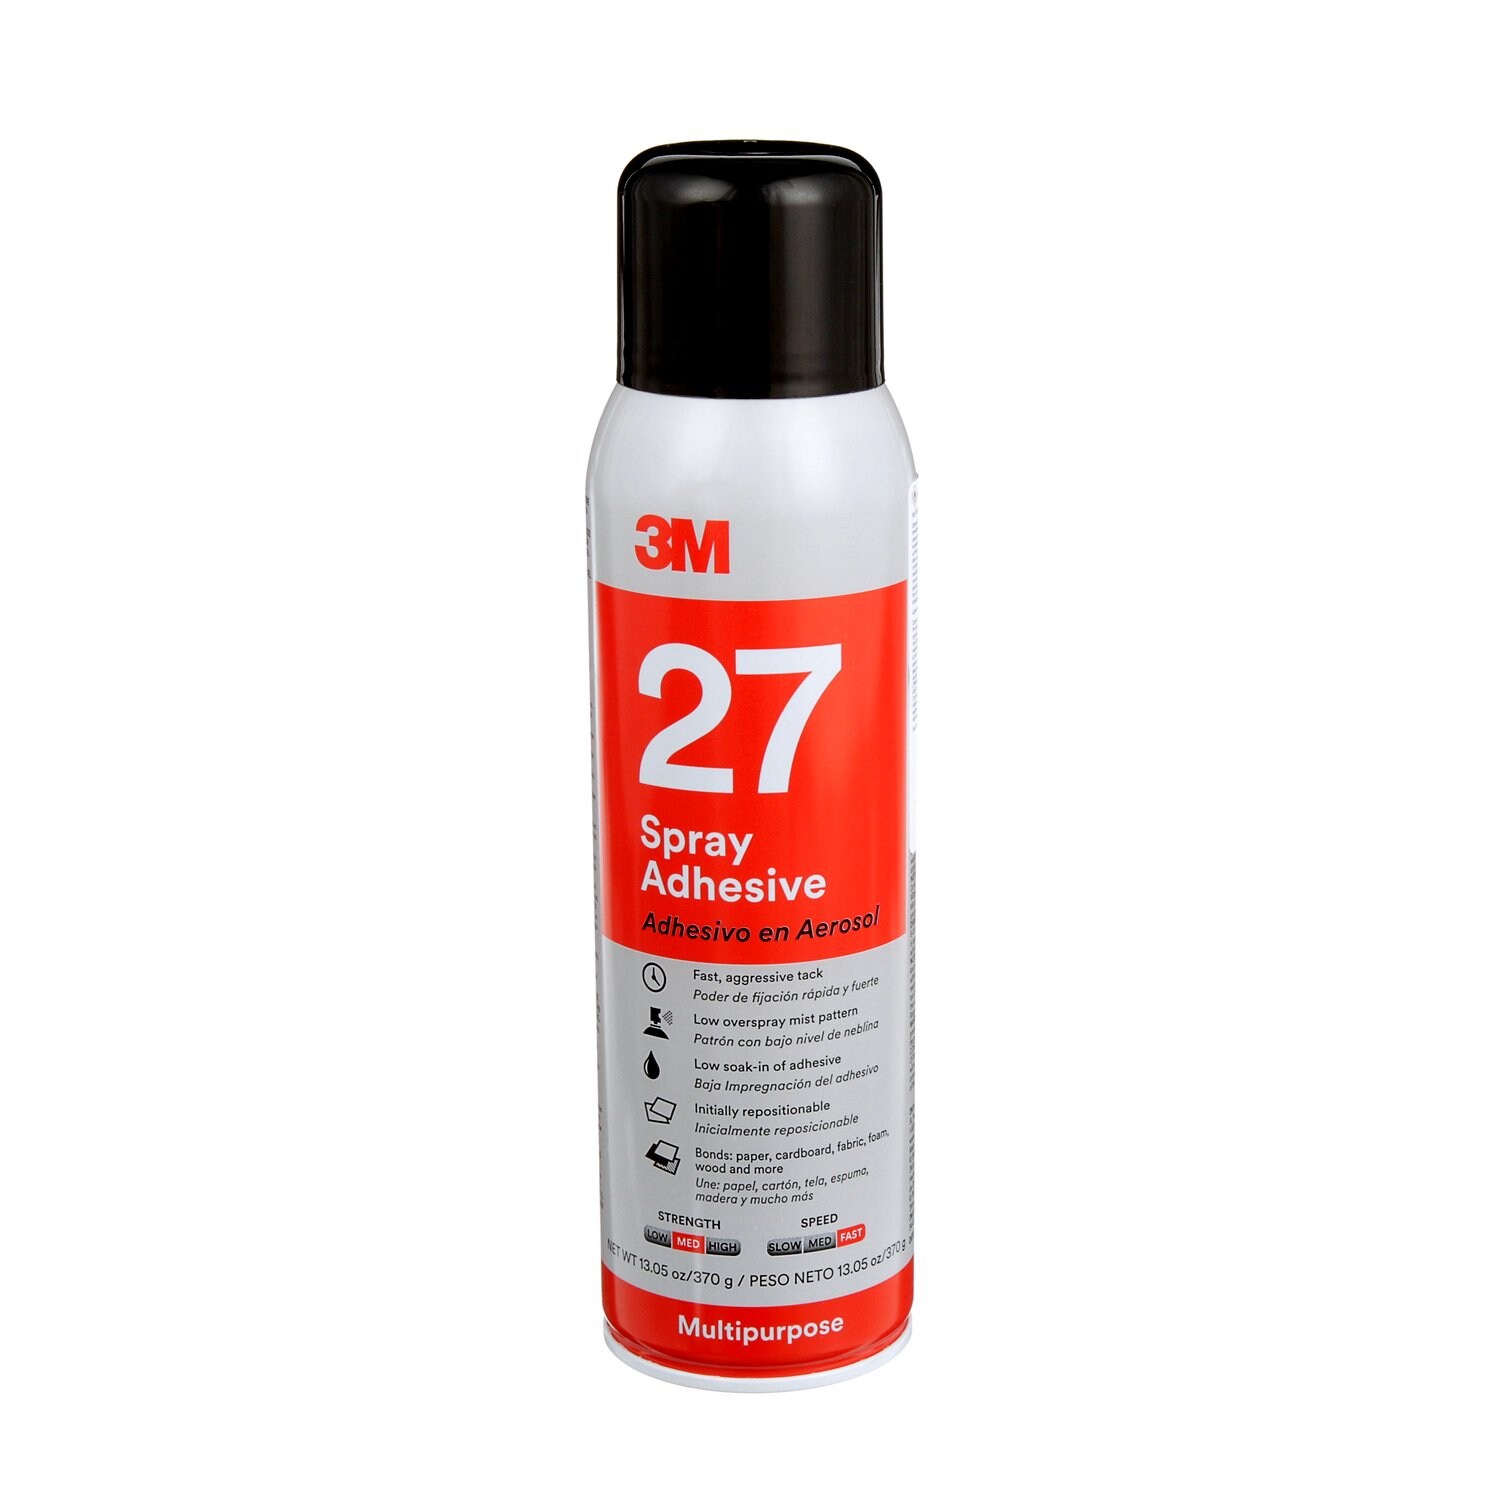 7000028596 - 3M Multi-Purpose Spray Adhesive 27, Clear, 16 fl oz Can (Net Wt 13.05
oz), 12/Case, NOT FOR SALE IN CA AND OTHER STATES